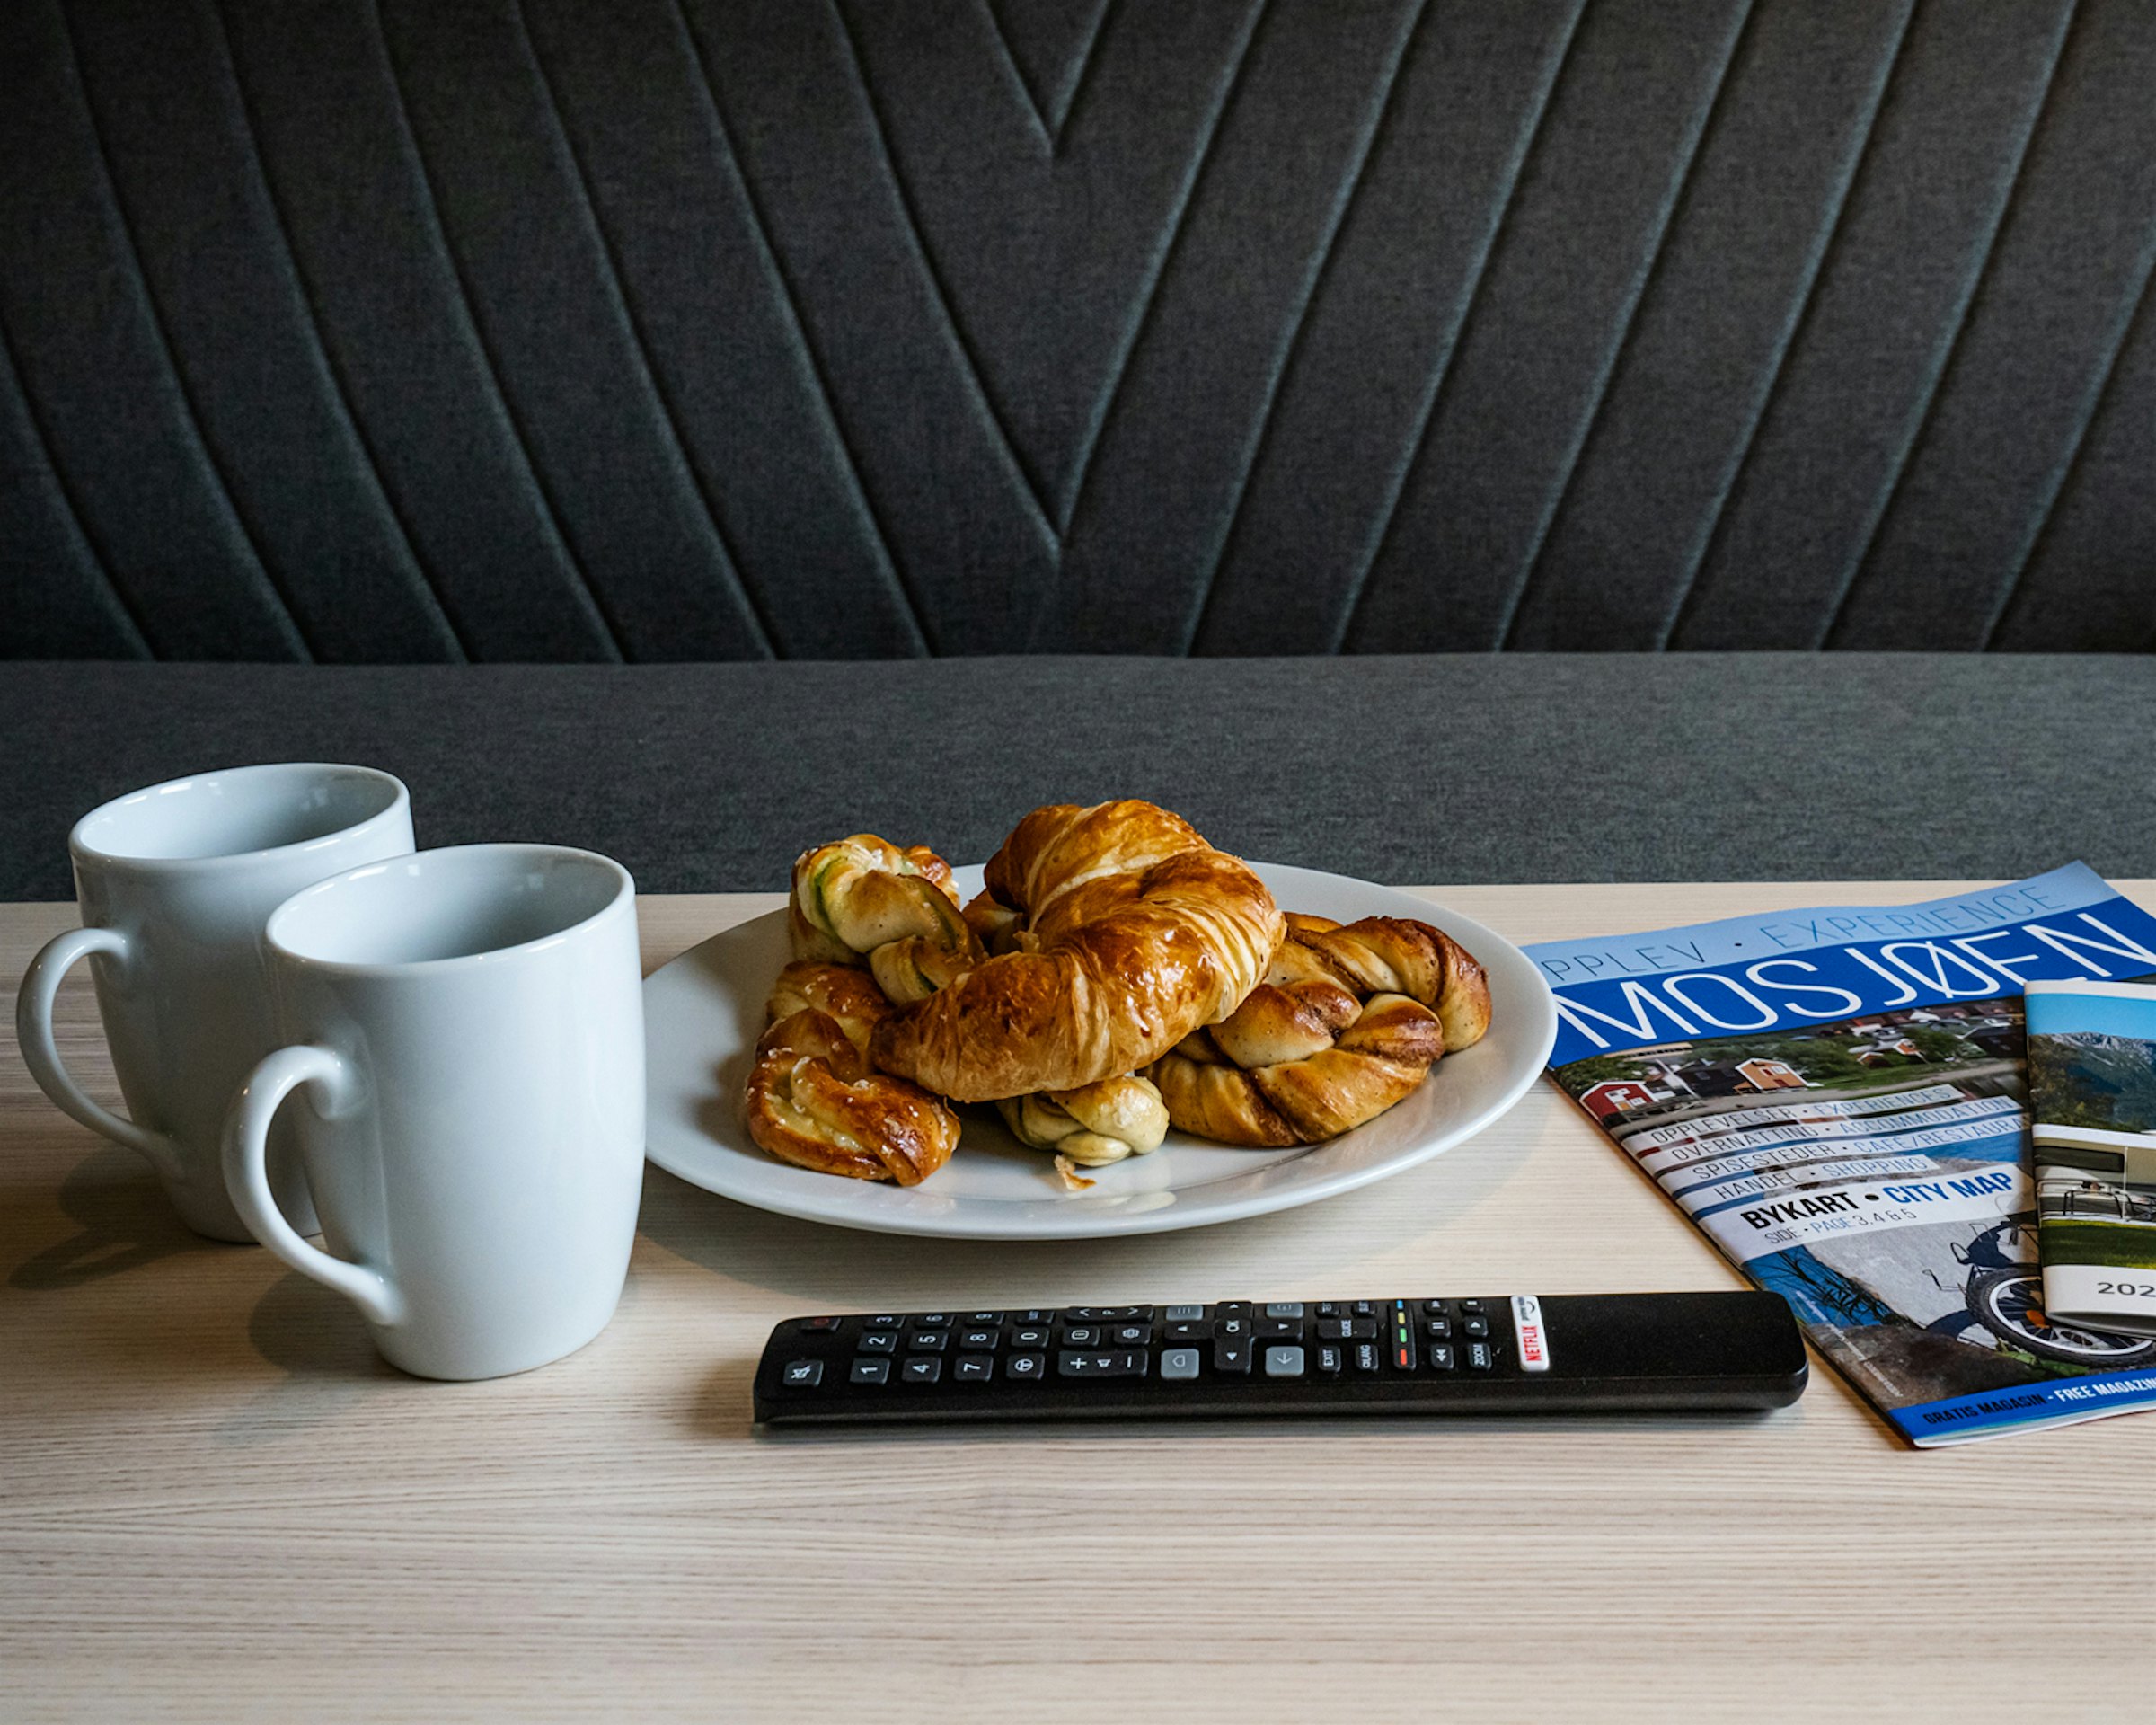 Close-up of two coffee cups, pastries, brochures and remote control. Photo